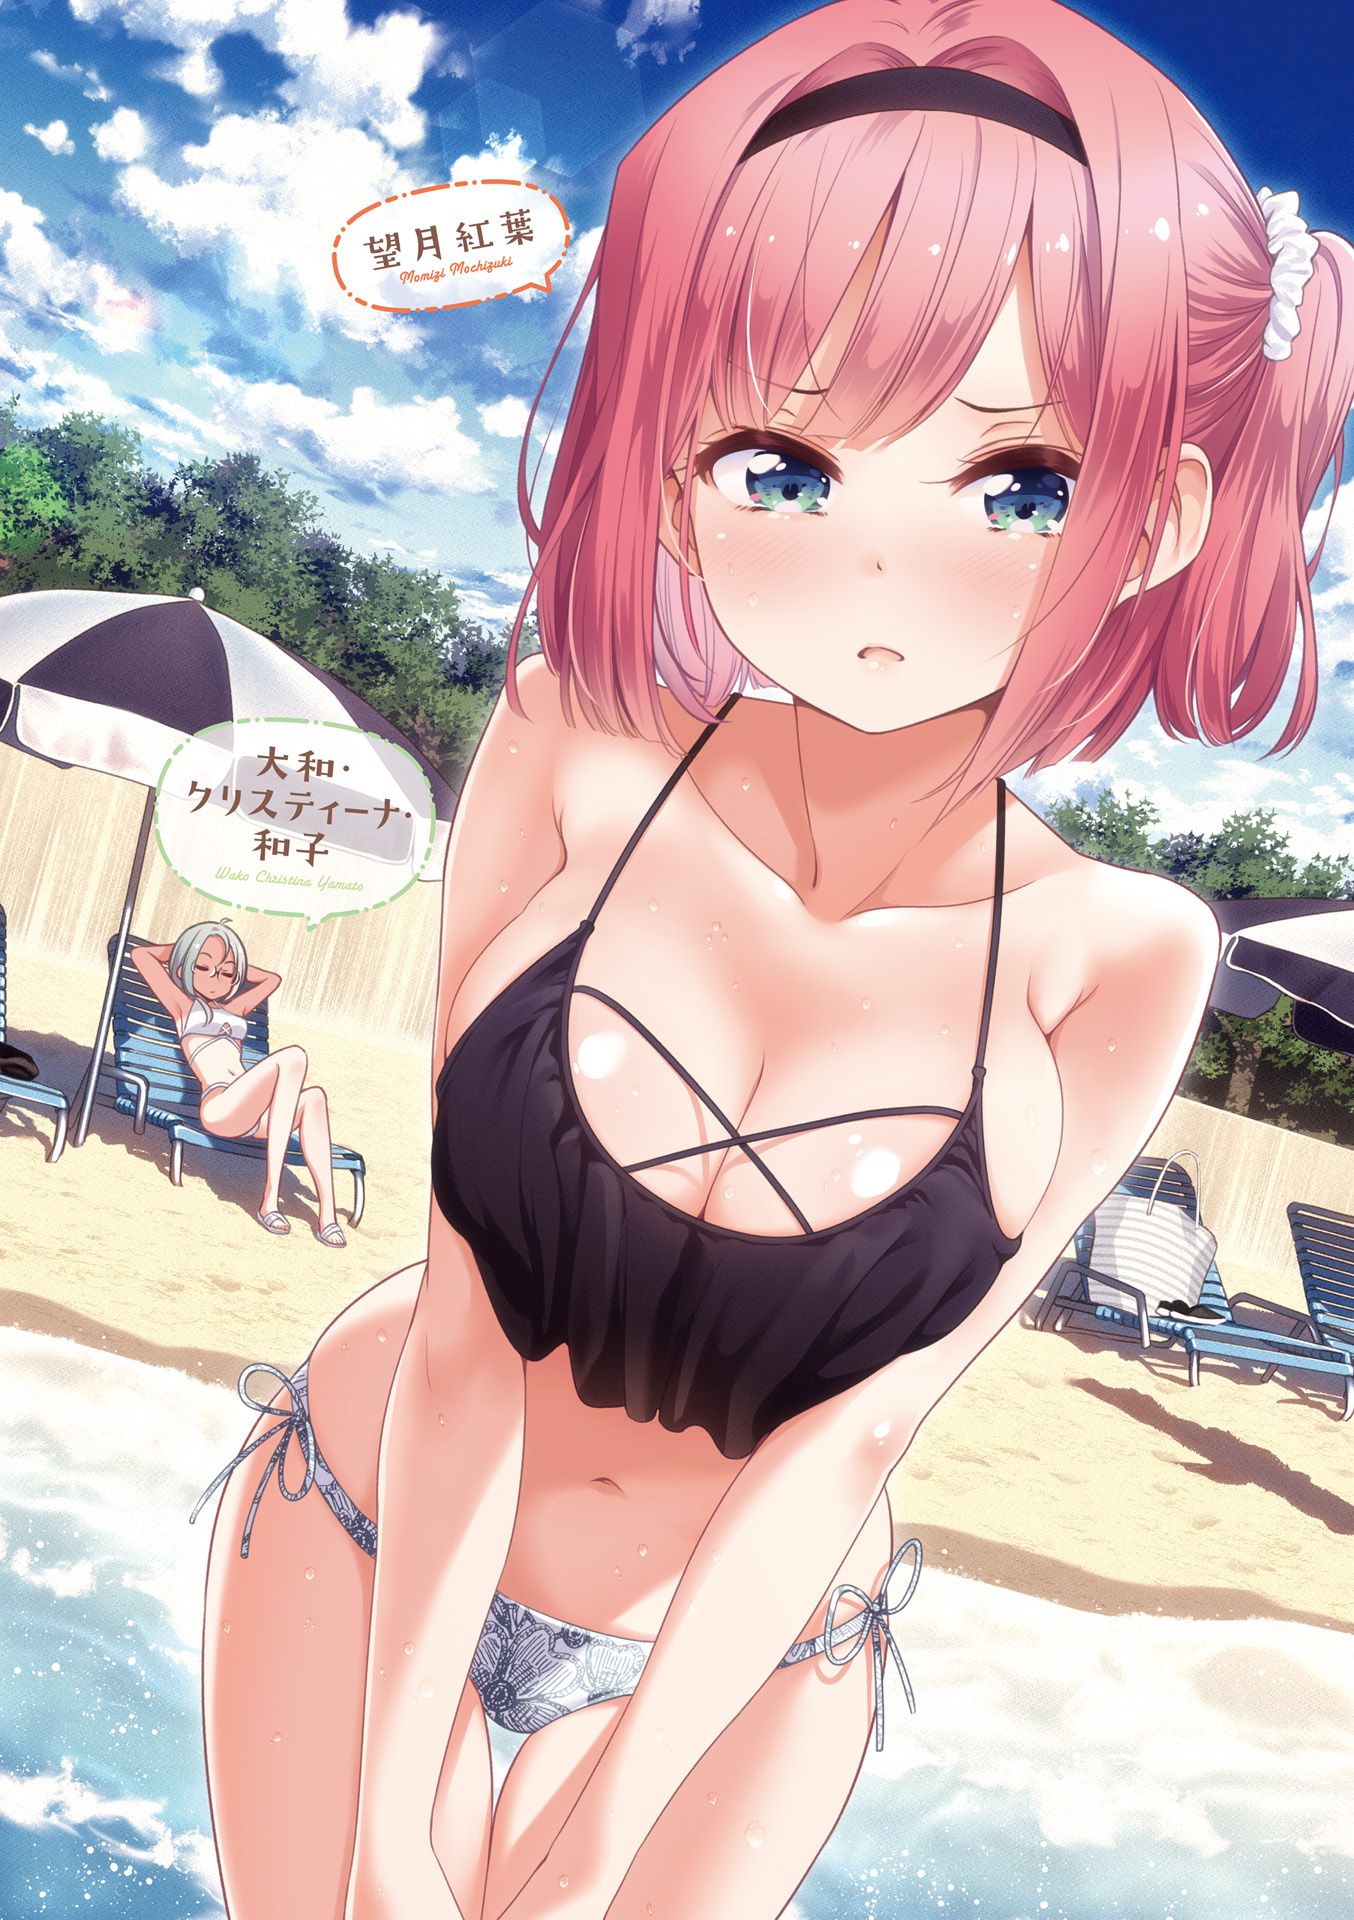 [With image] New GAME's most naughty character, determined www www 4